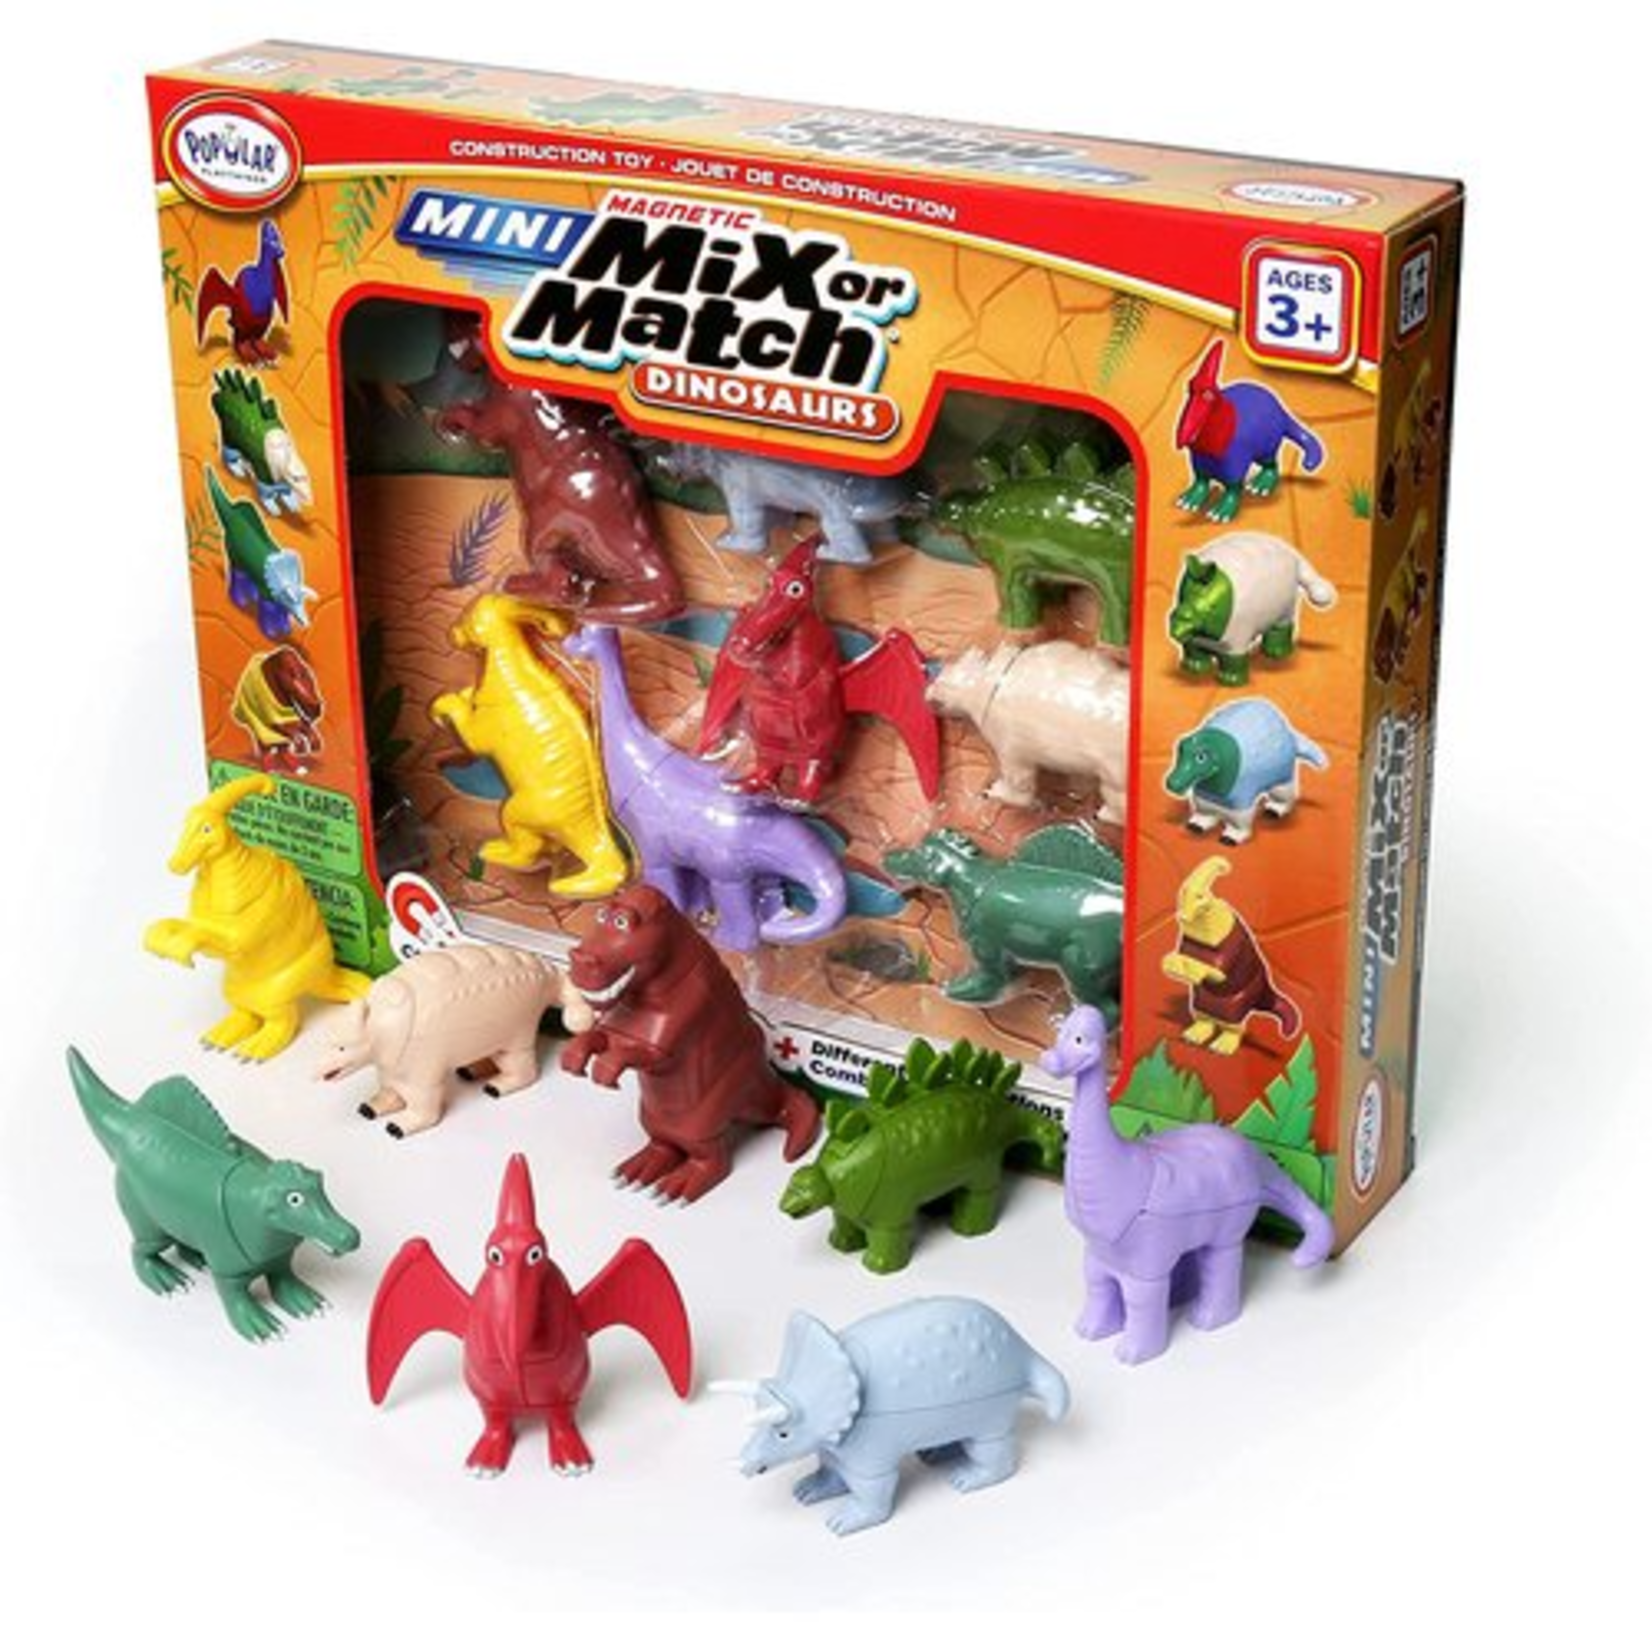 Popular Playthings Mini Magnetic Mix or Match - Dinosaurs Deluxe